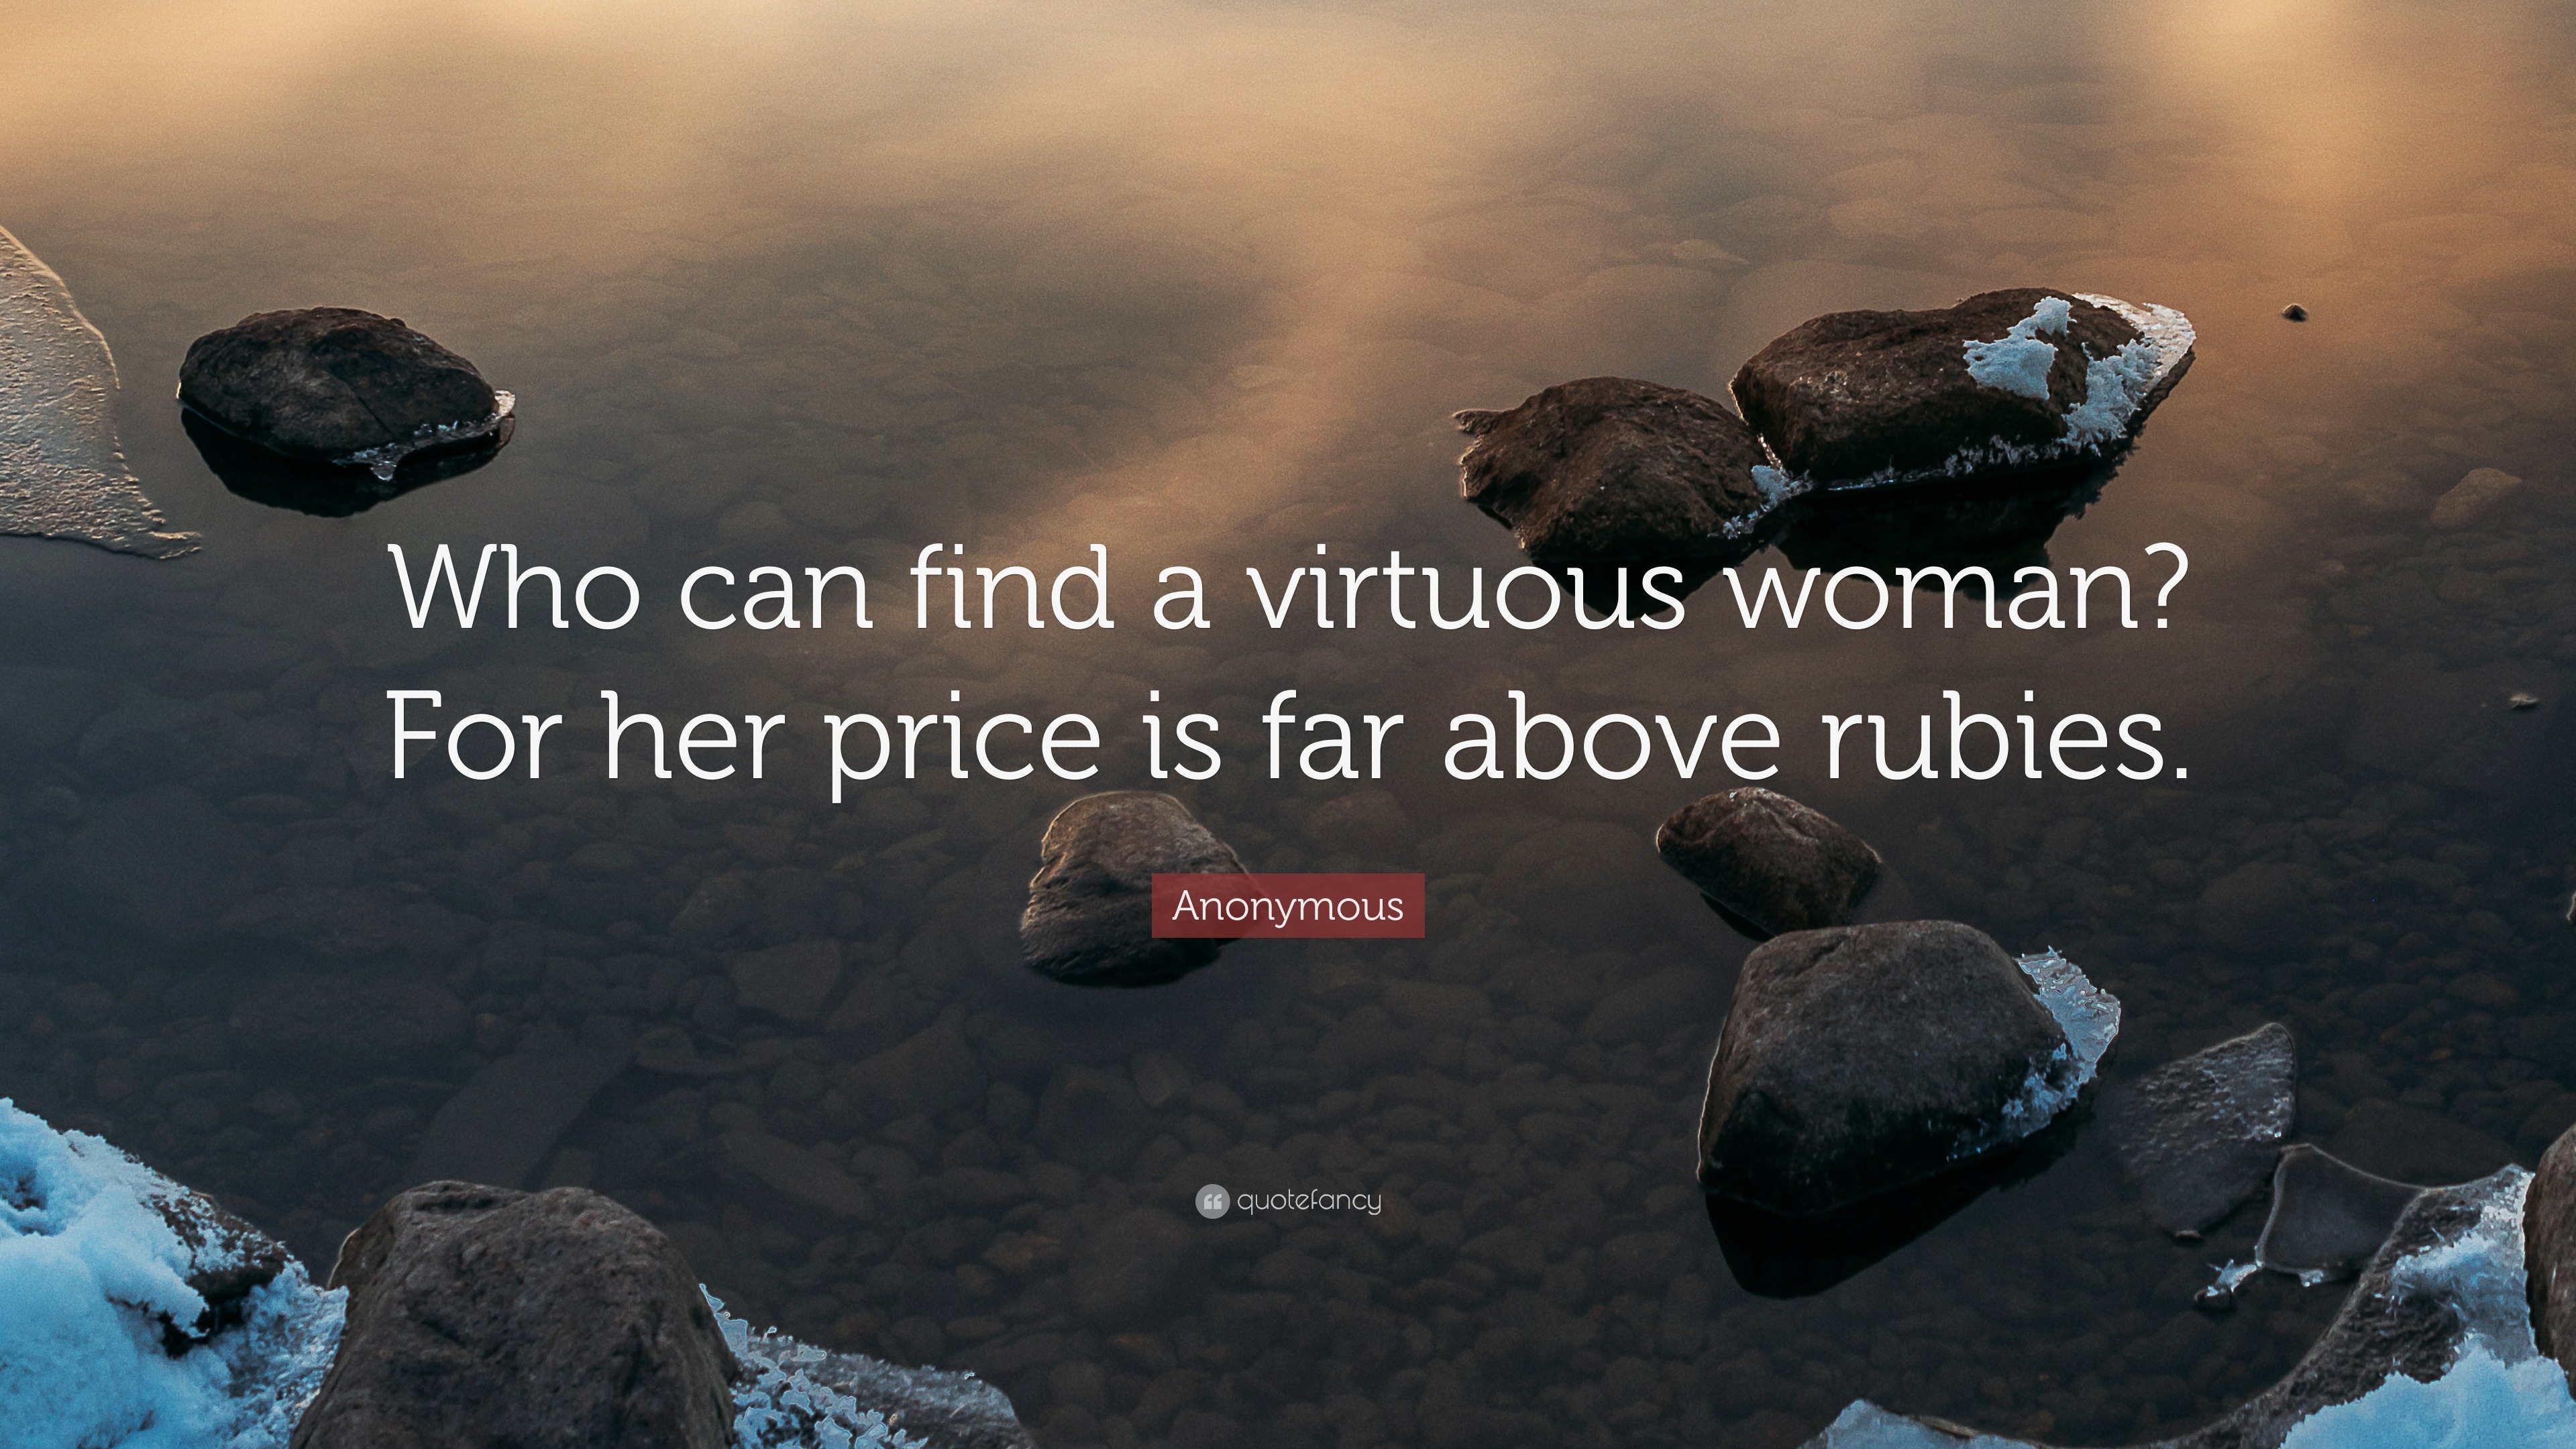 Signature Woman – Her worth is far above rubies